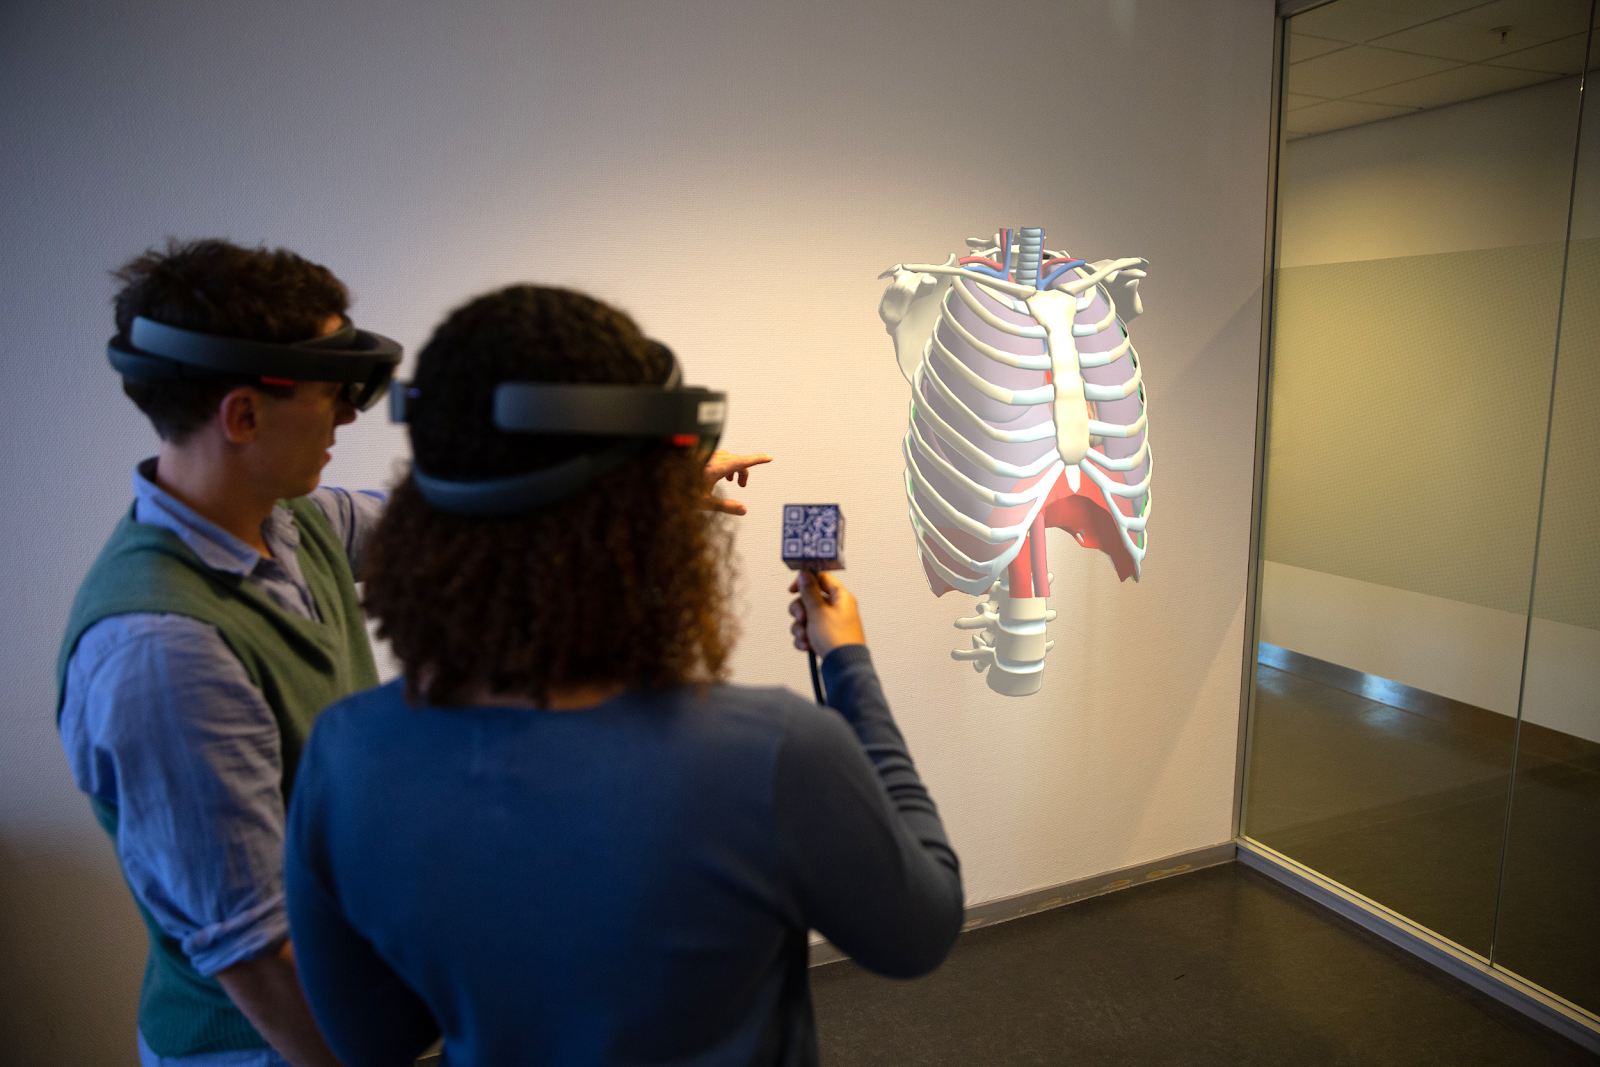 By using a real stethoscope that is being tracked by the HoloLens, students can interact with the virtual torso